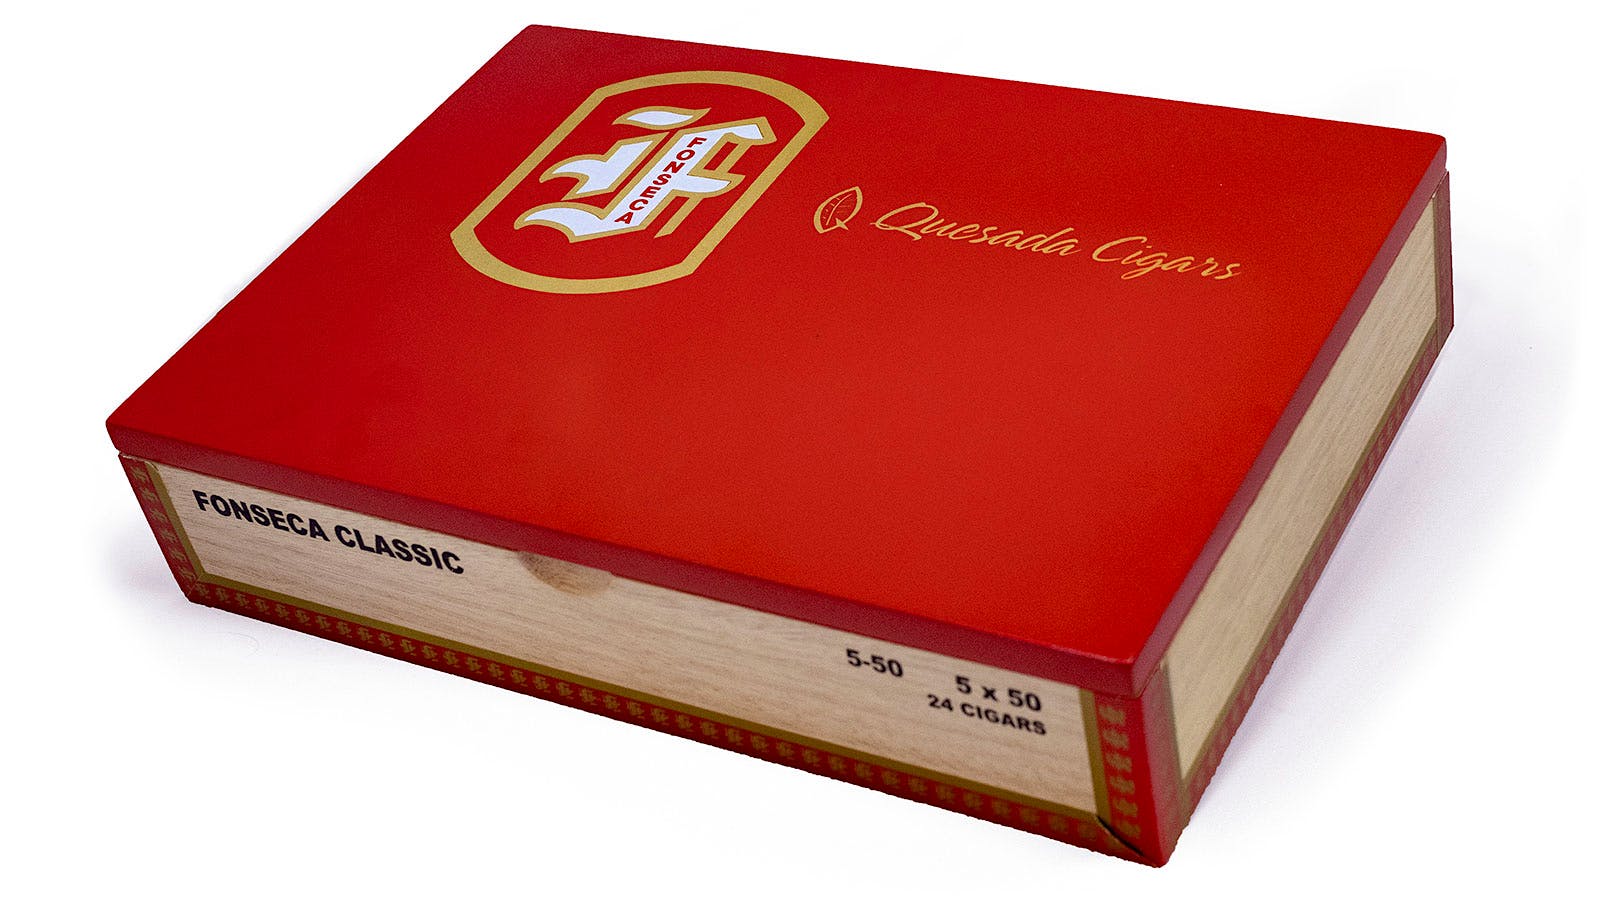 The plain cedar cigar boxes emblazoned with the familiar Fonseca logo have been updated with more modern-looking wooden boxes, complete with a bright red lid.